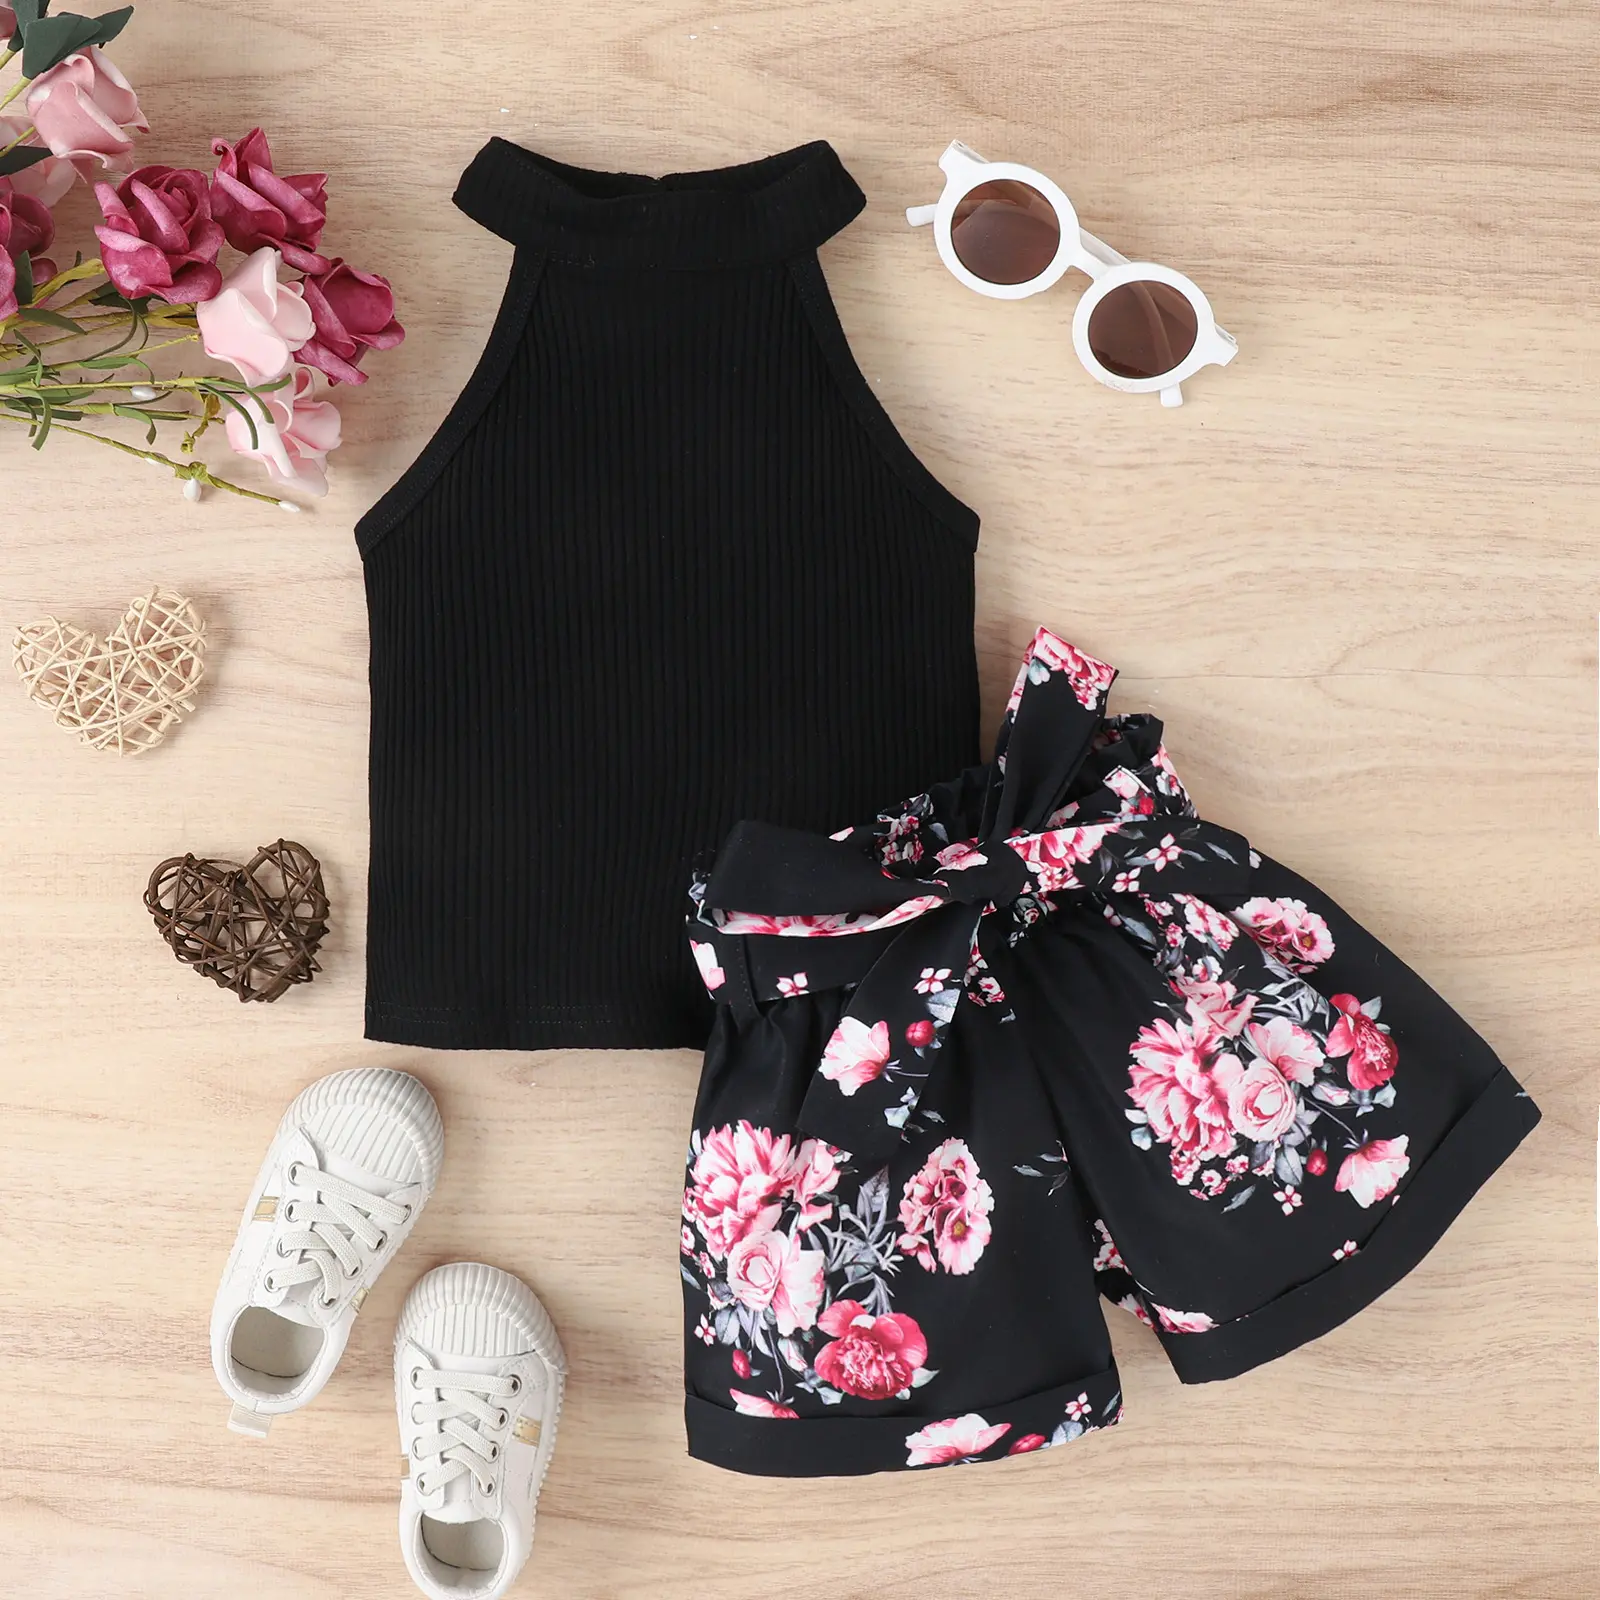 2023 Toddler Clothes Summer Kids Children Fashion Ribbed Sleeveless Tank Tops Floral Shorts 2Pcs Girls Outfit Set